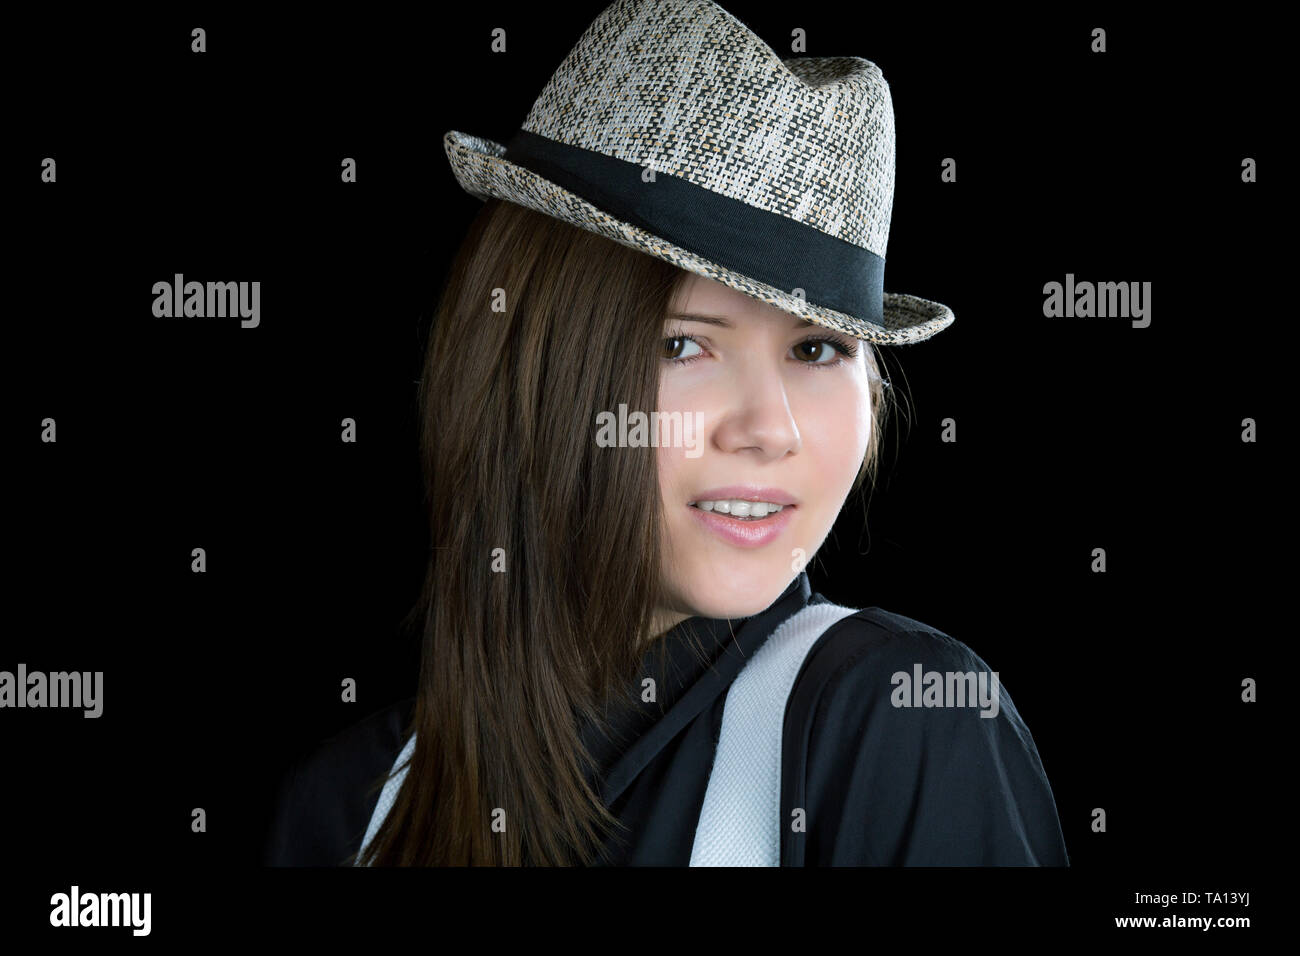 girl with braces and  man's hat on a black background Stock Photo